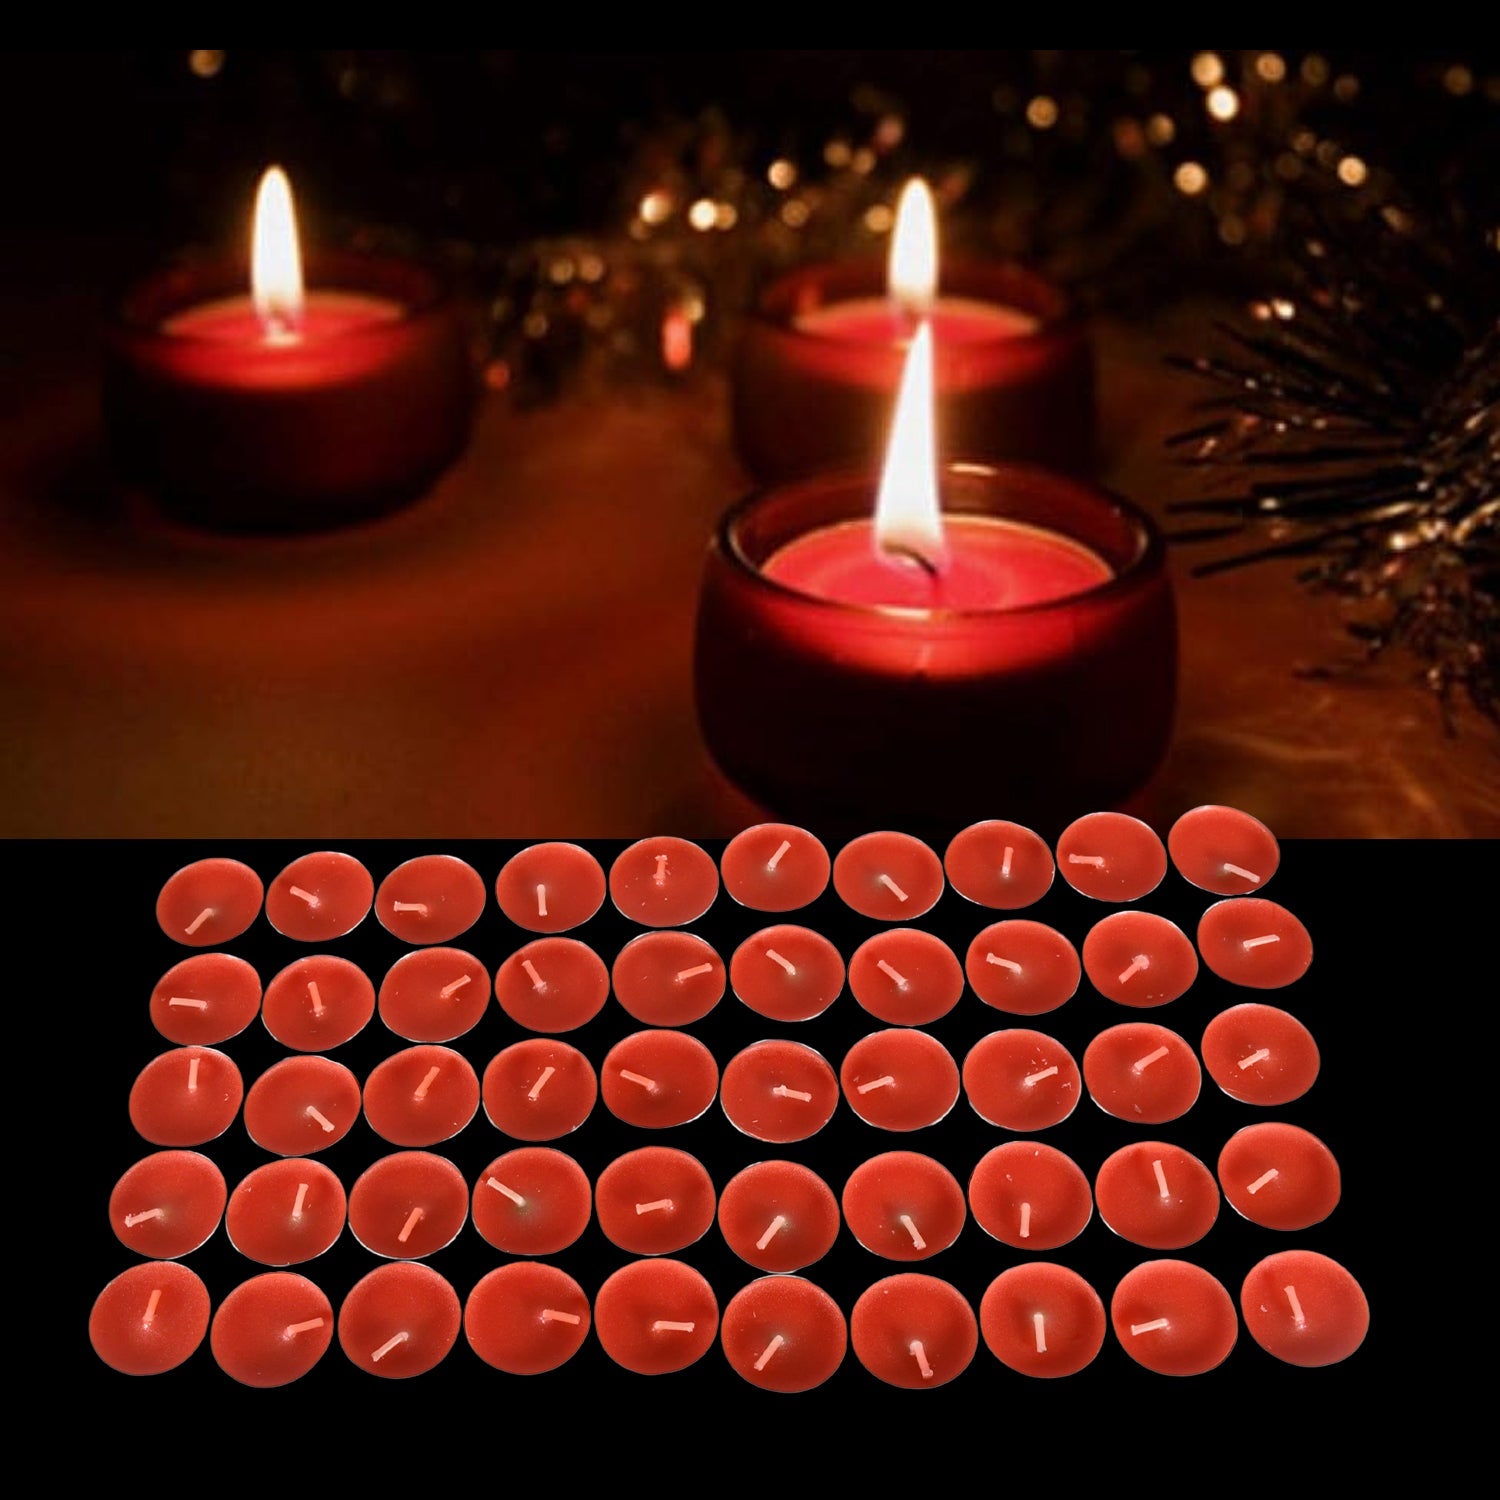 12691 Tealight Candles Set, Smokeless Candles, Tealight Diwali Candles for Diwali, Home Decor, Decoration, Party, Festivals for Mood Dinners Parities Home Decoration Wedding Candle (50 Pcs set)